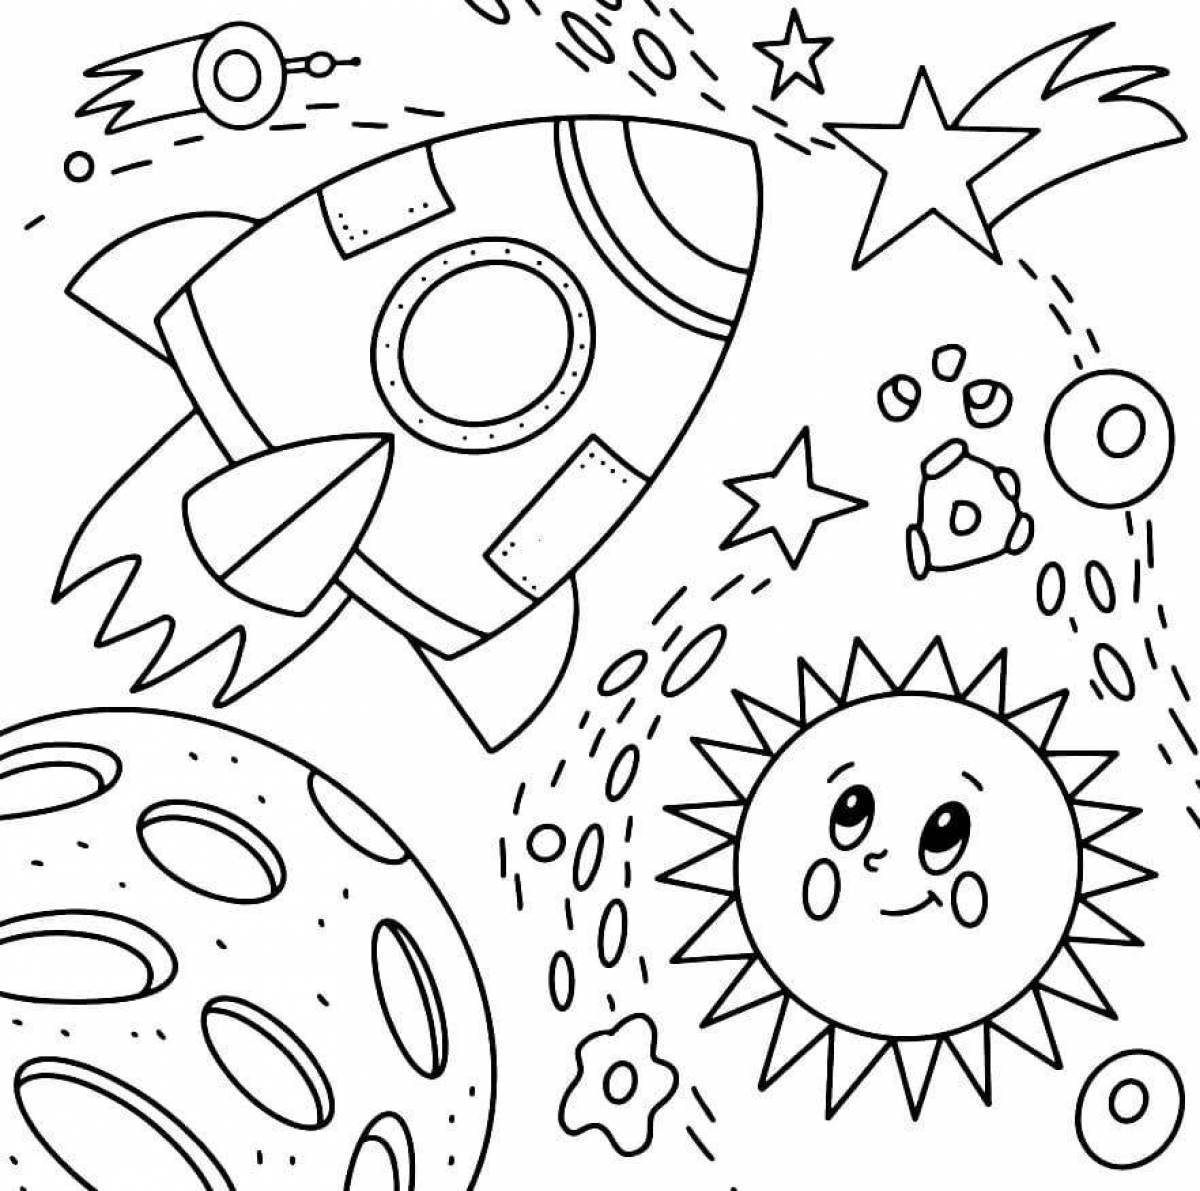 Space and planets for kids #2